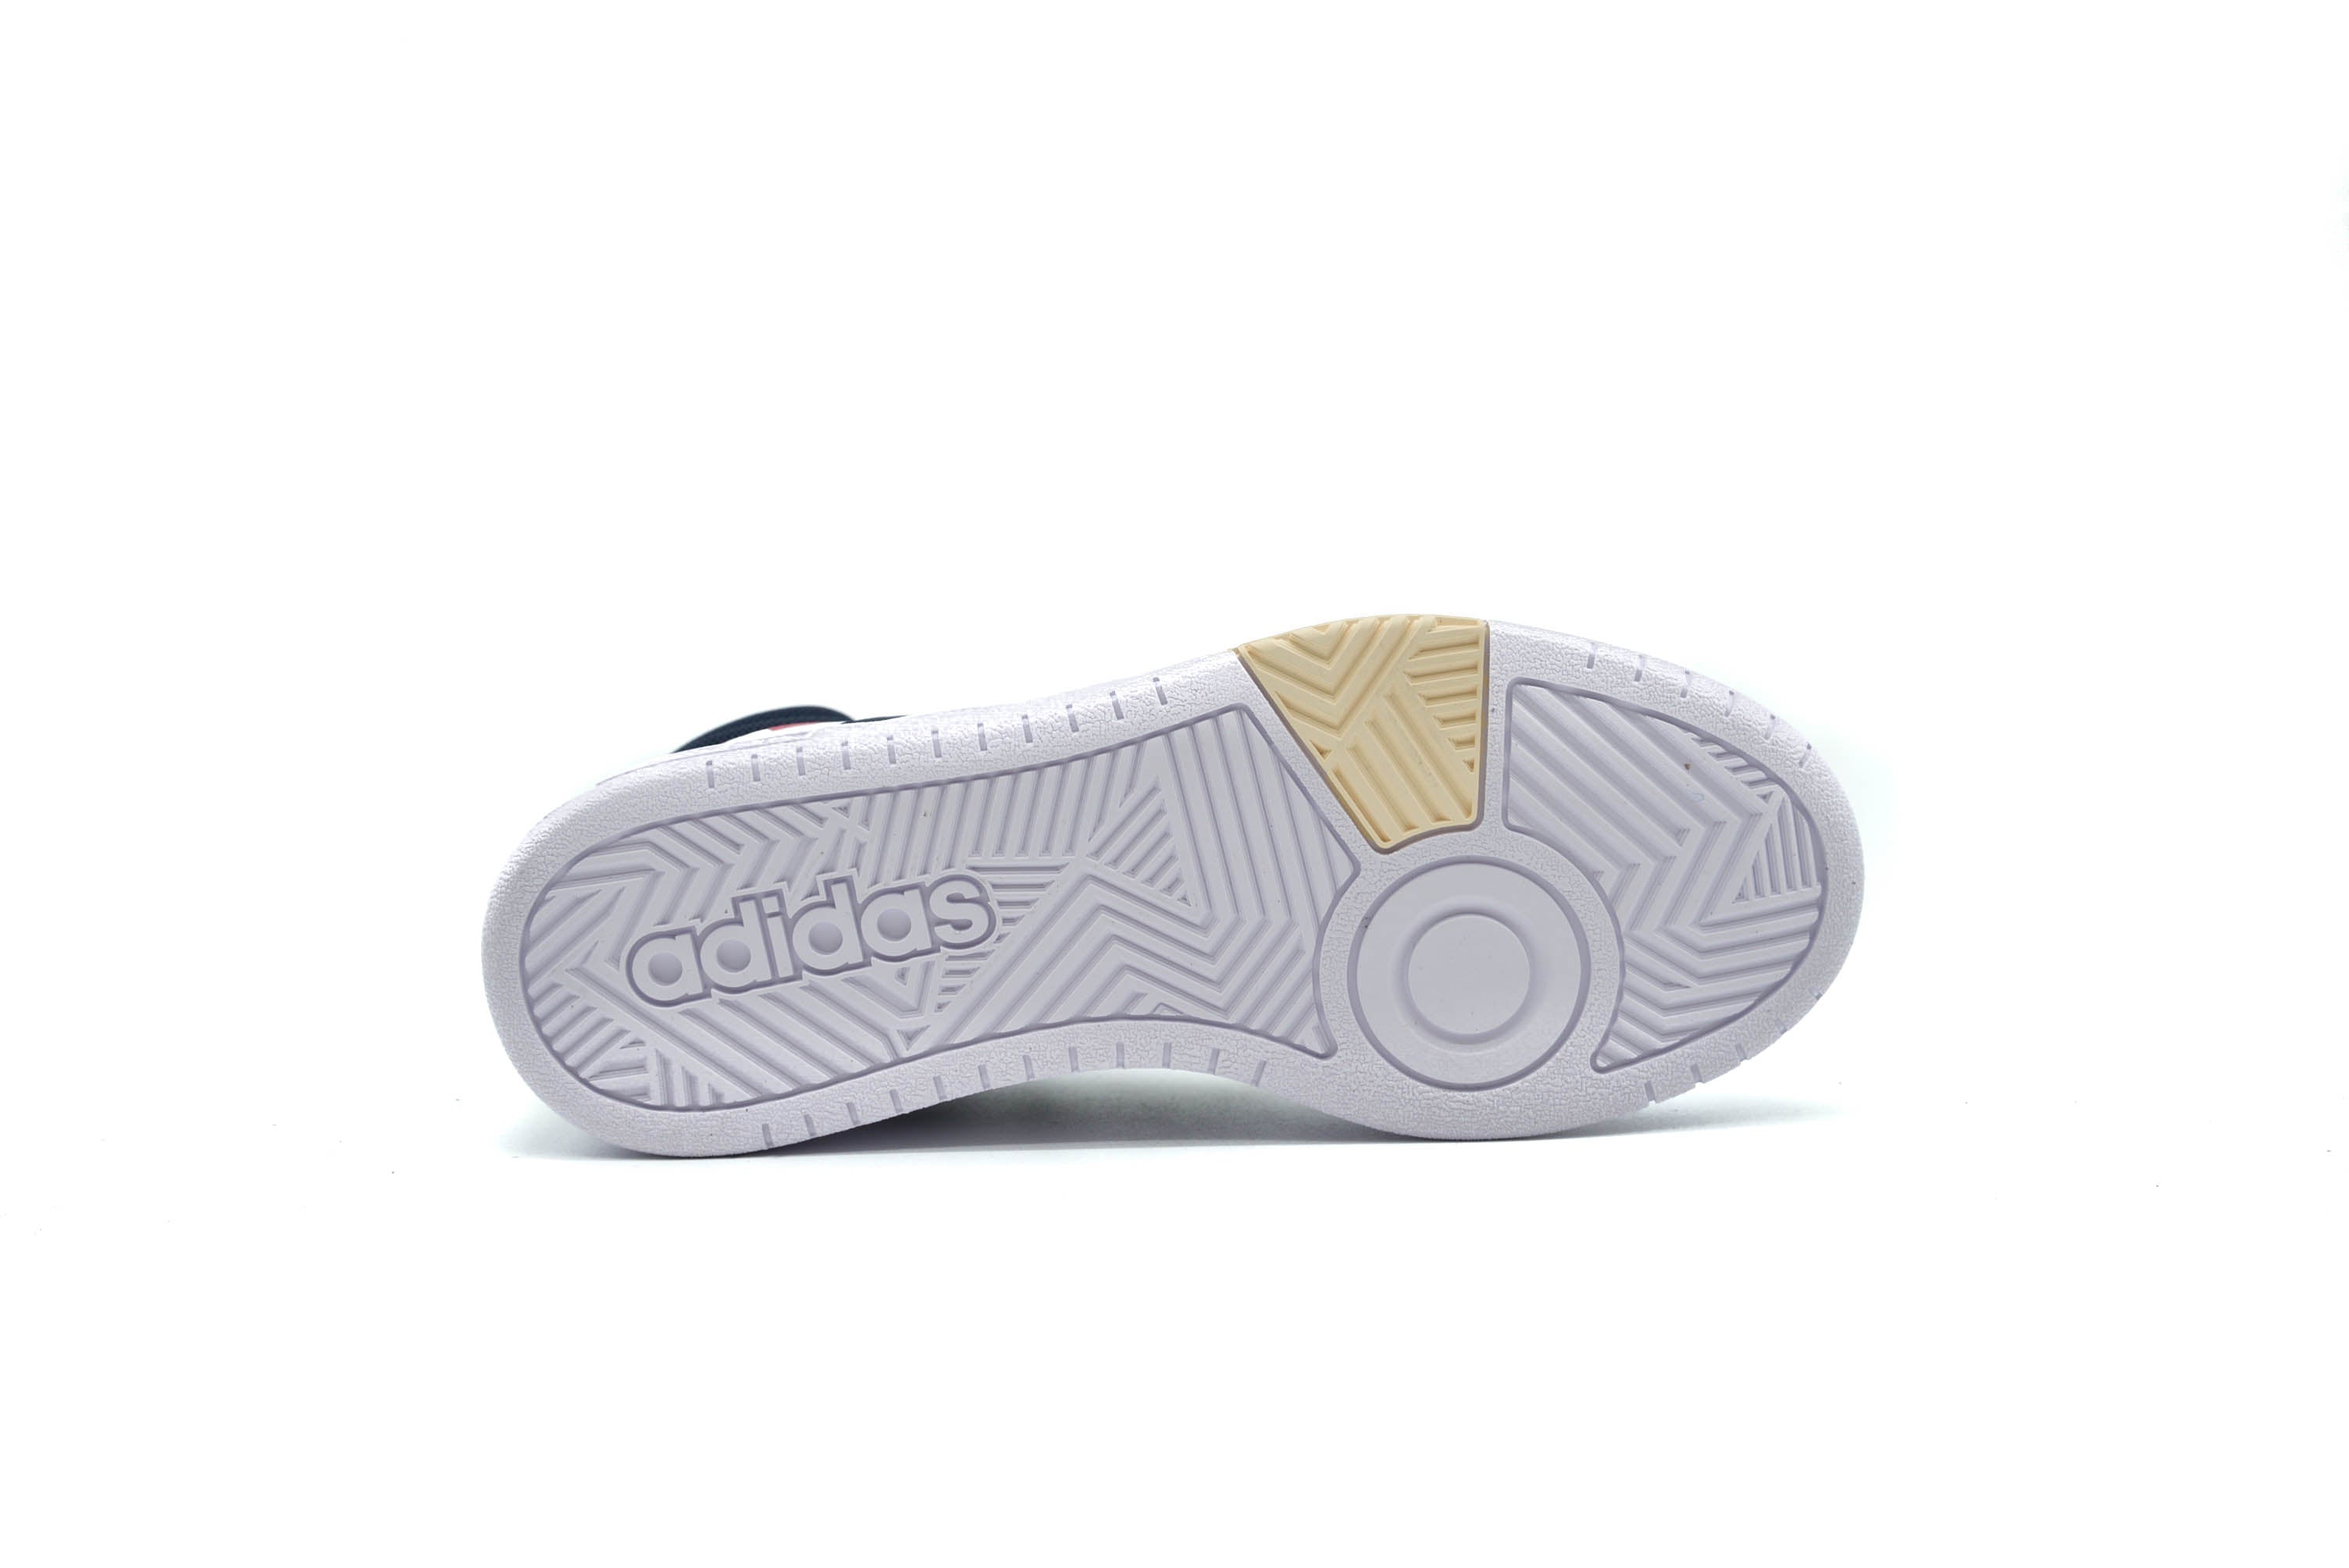 ADIDAS Hoops 3.0 Mid Classic Shoes